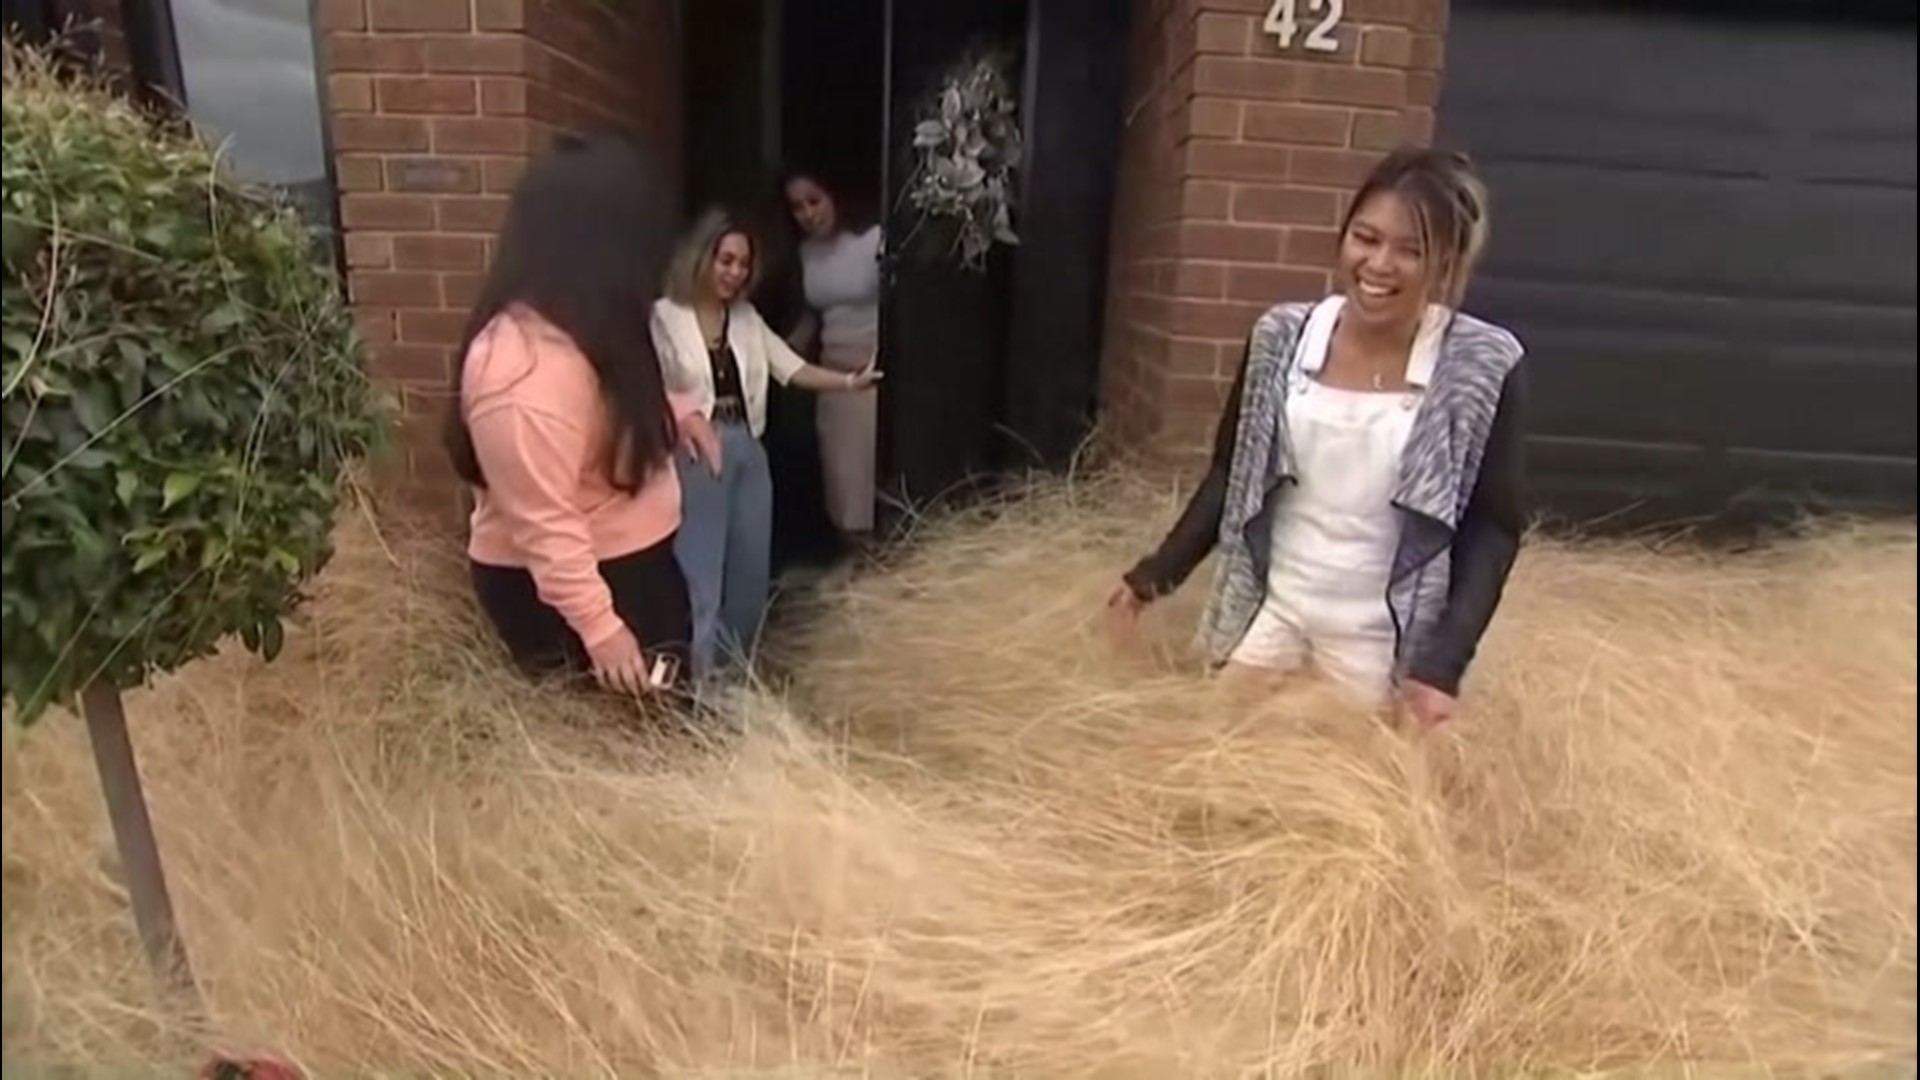 Strong storms and wild weather led to tons of tumbleweeds covering a portion of Hillside, a suburb of Melbourne, Australia, on Dec. 5.